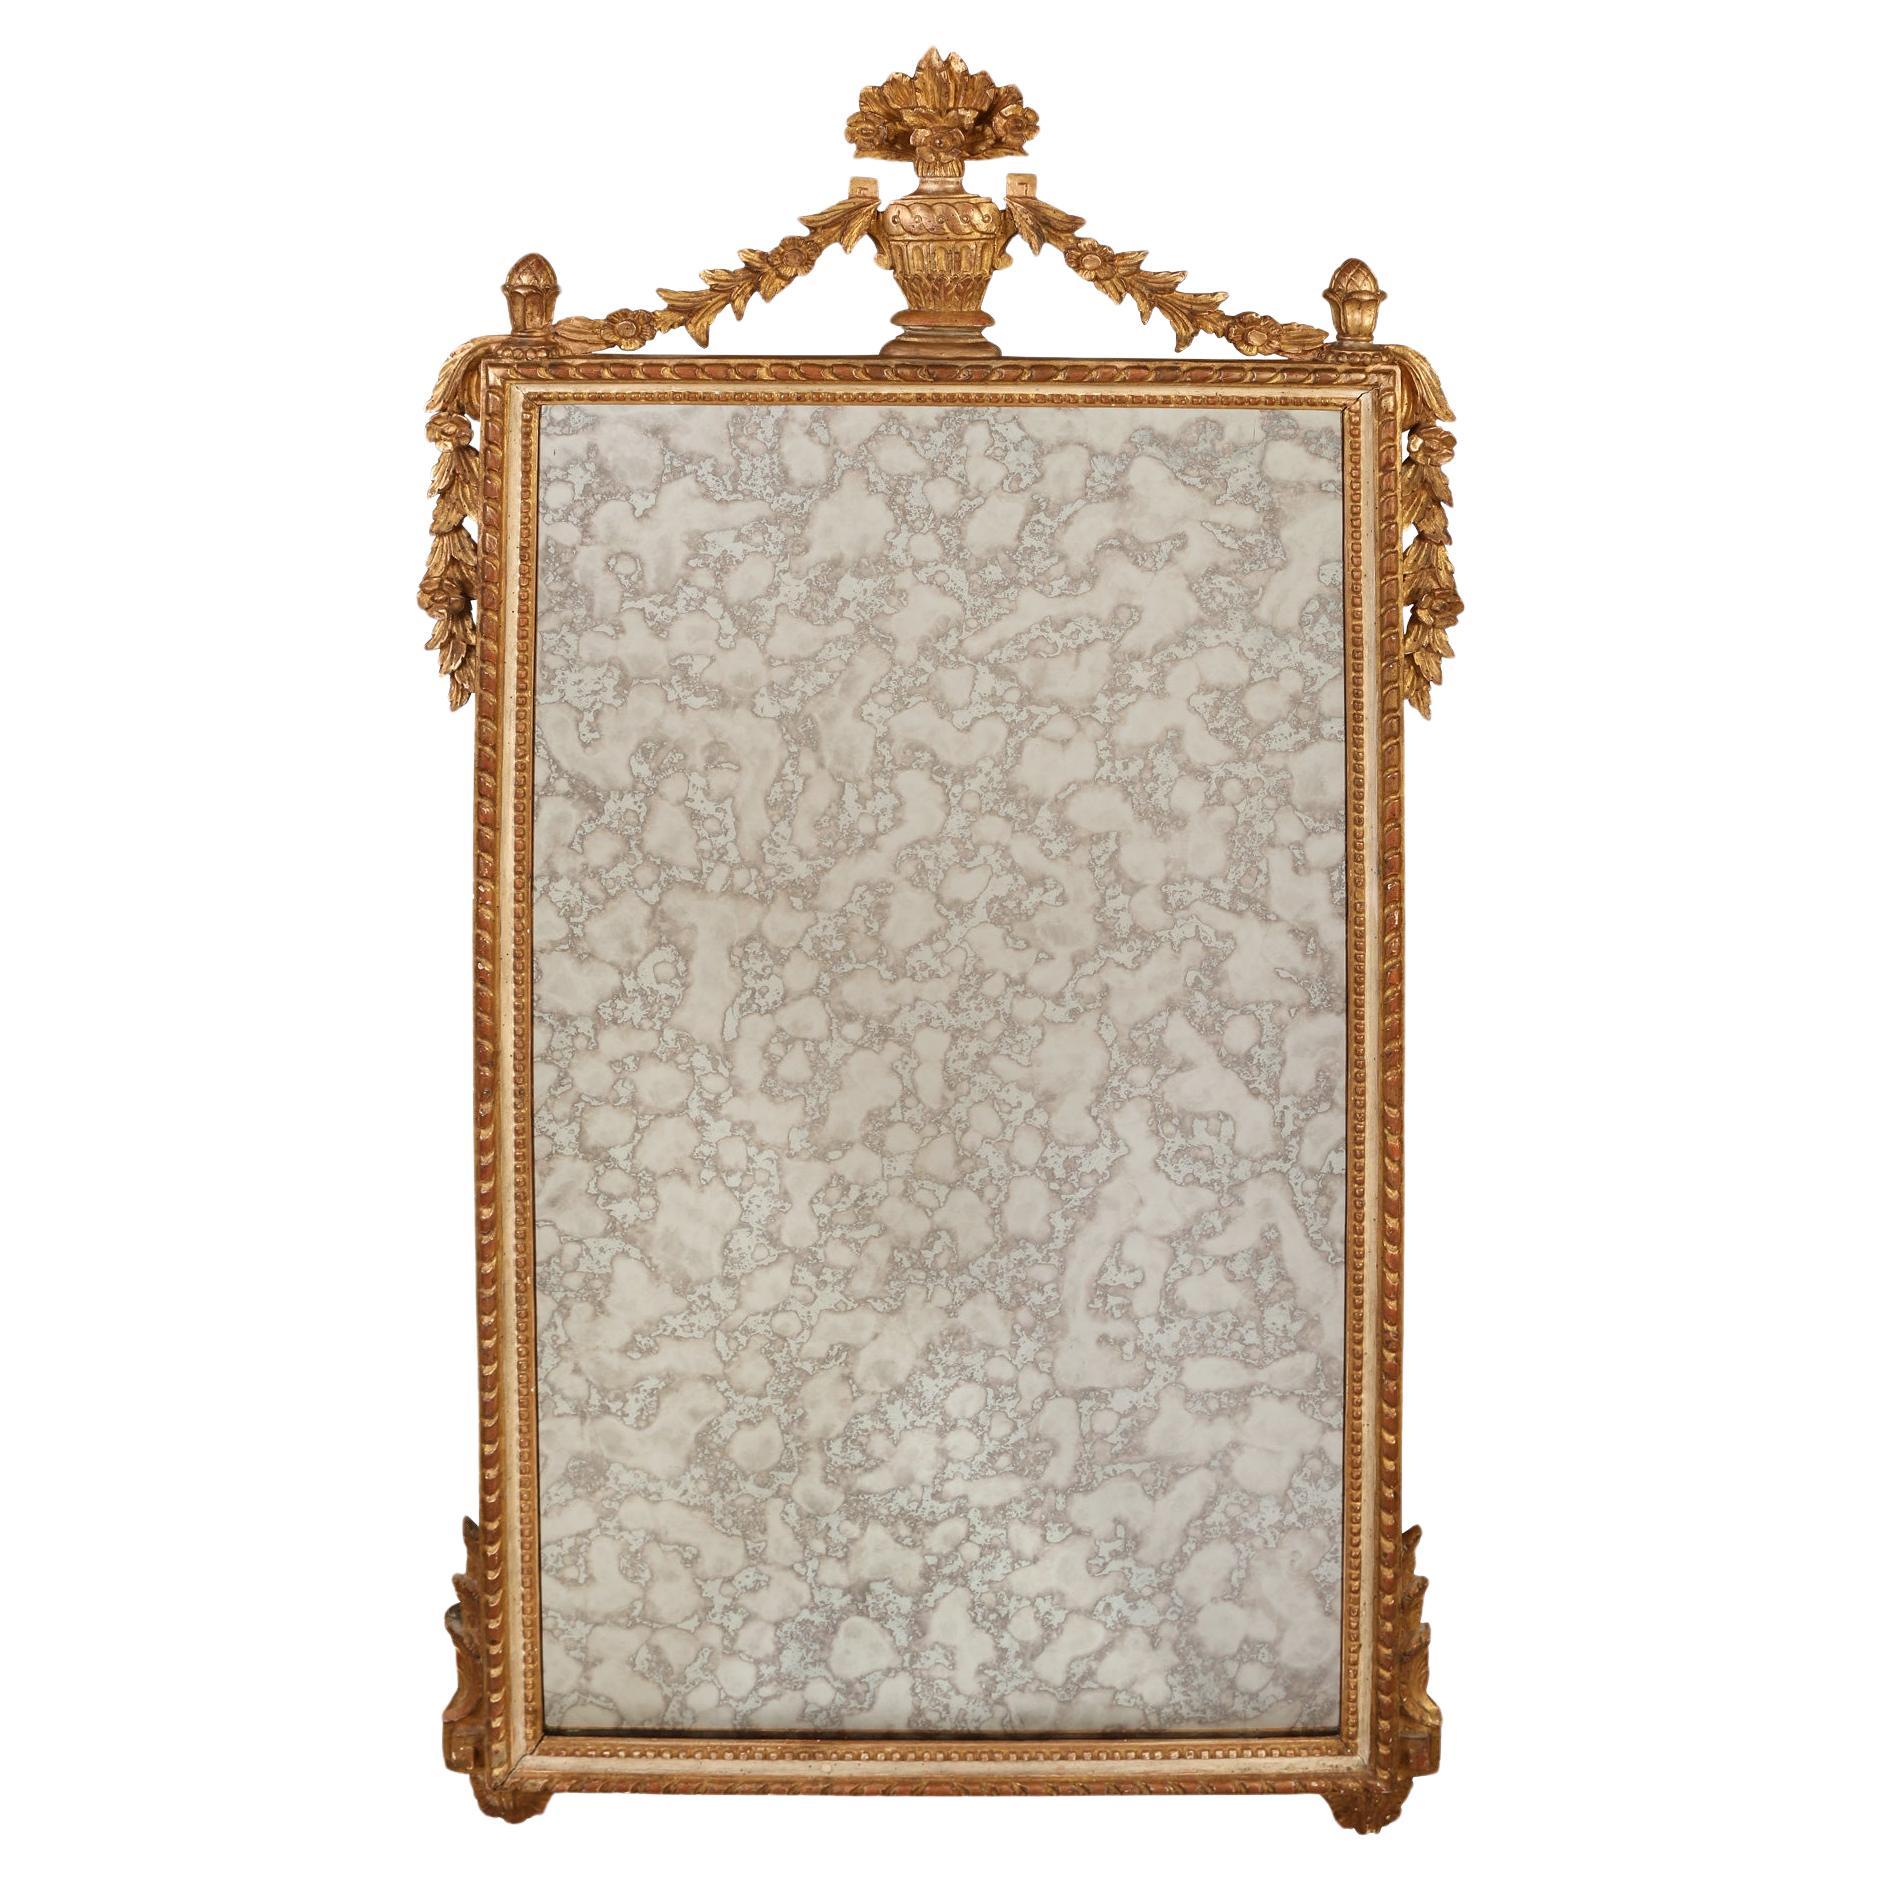 Neoclassical Giltwood Mirror With Urn and Garland Crest